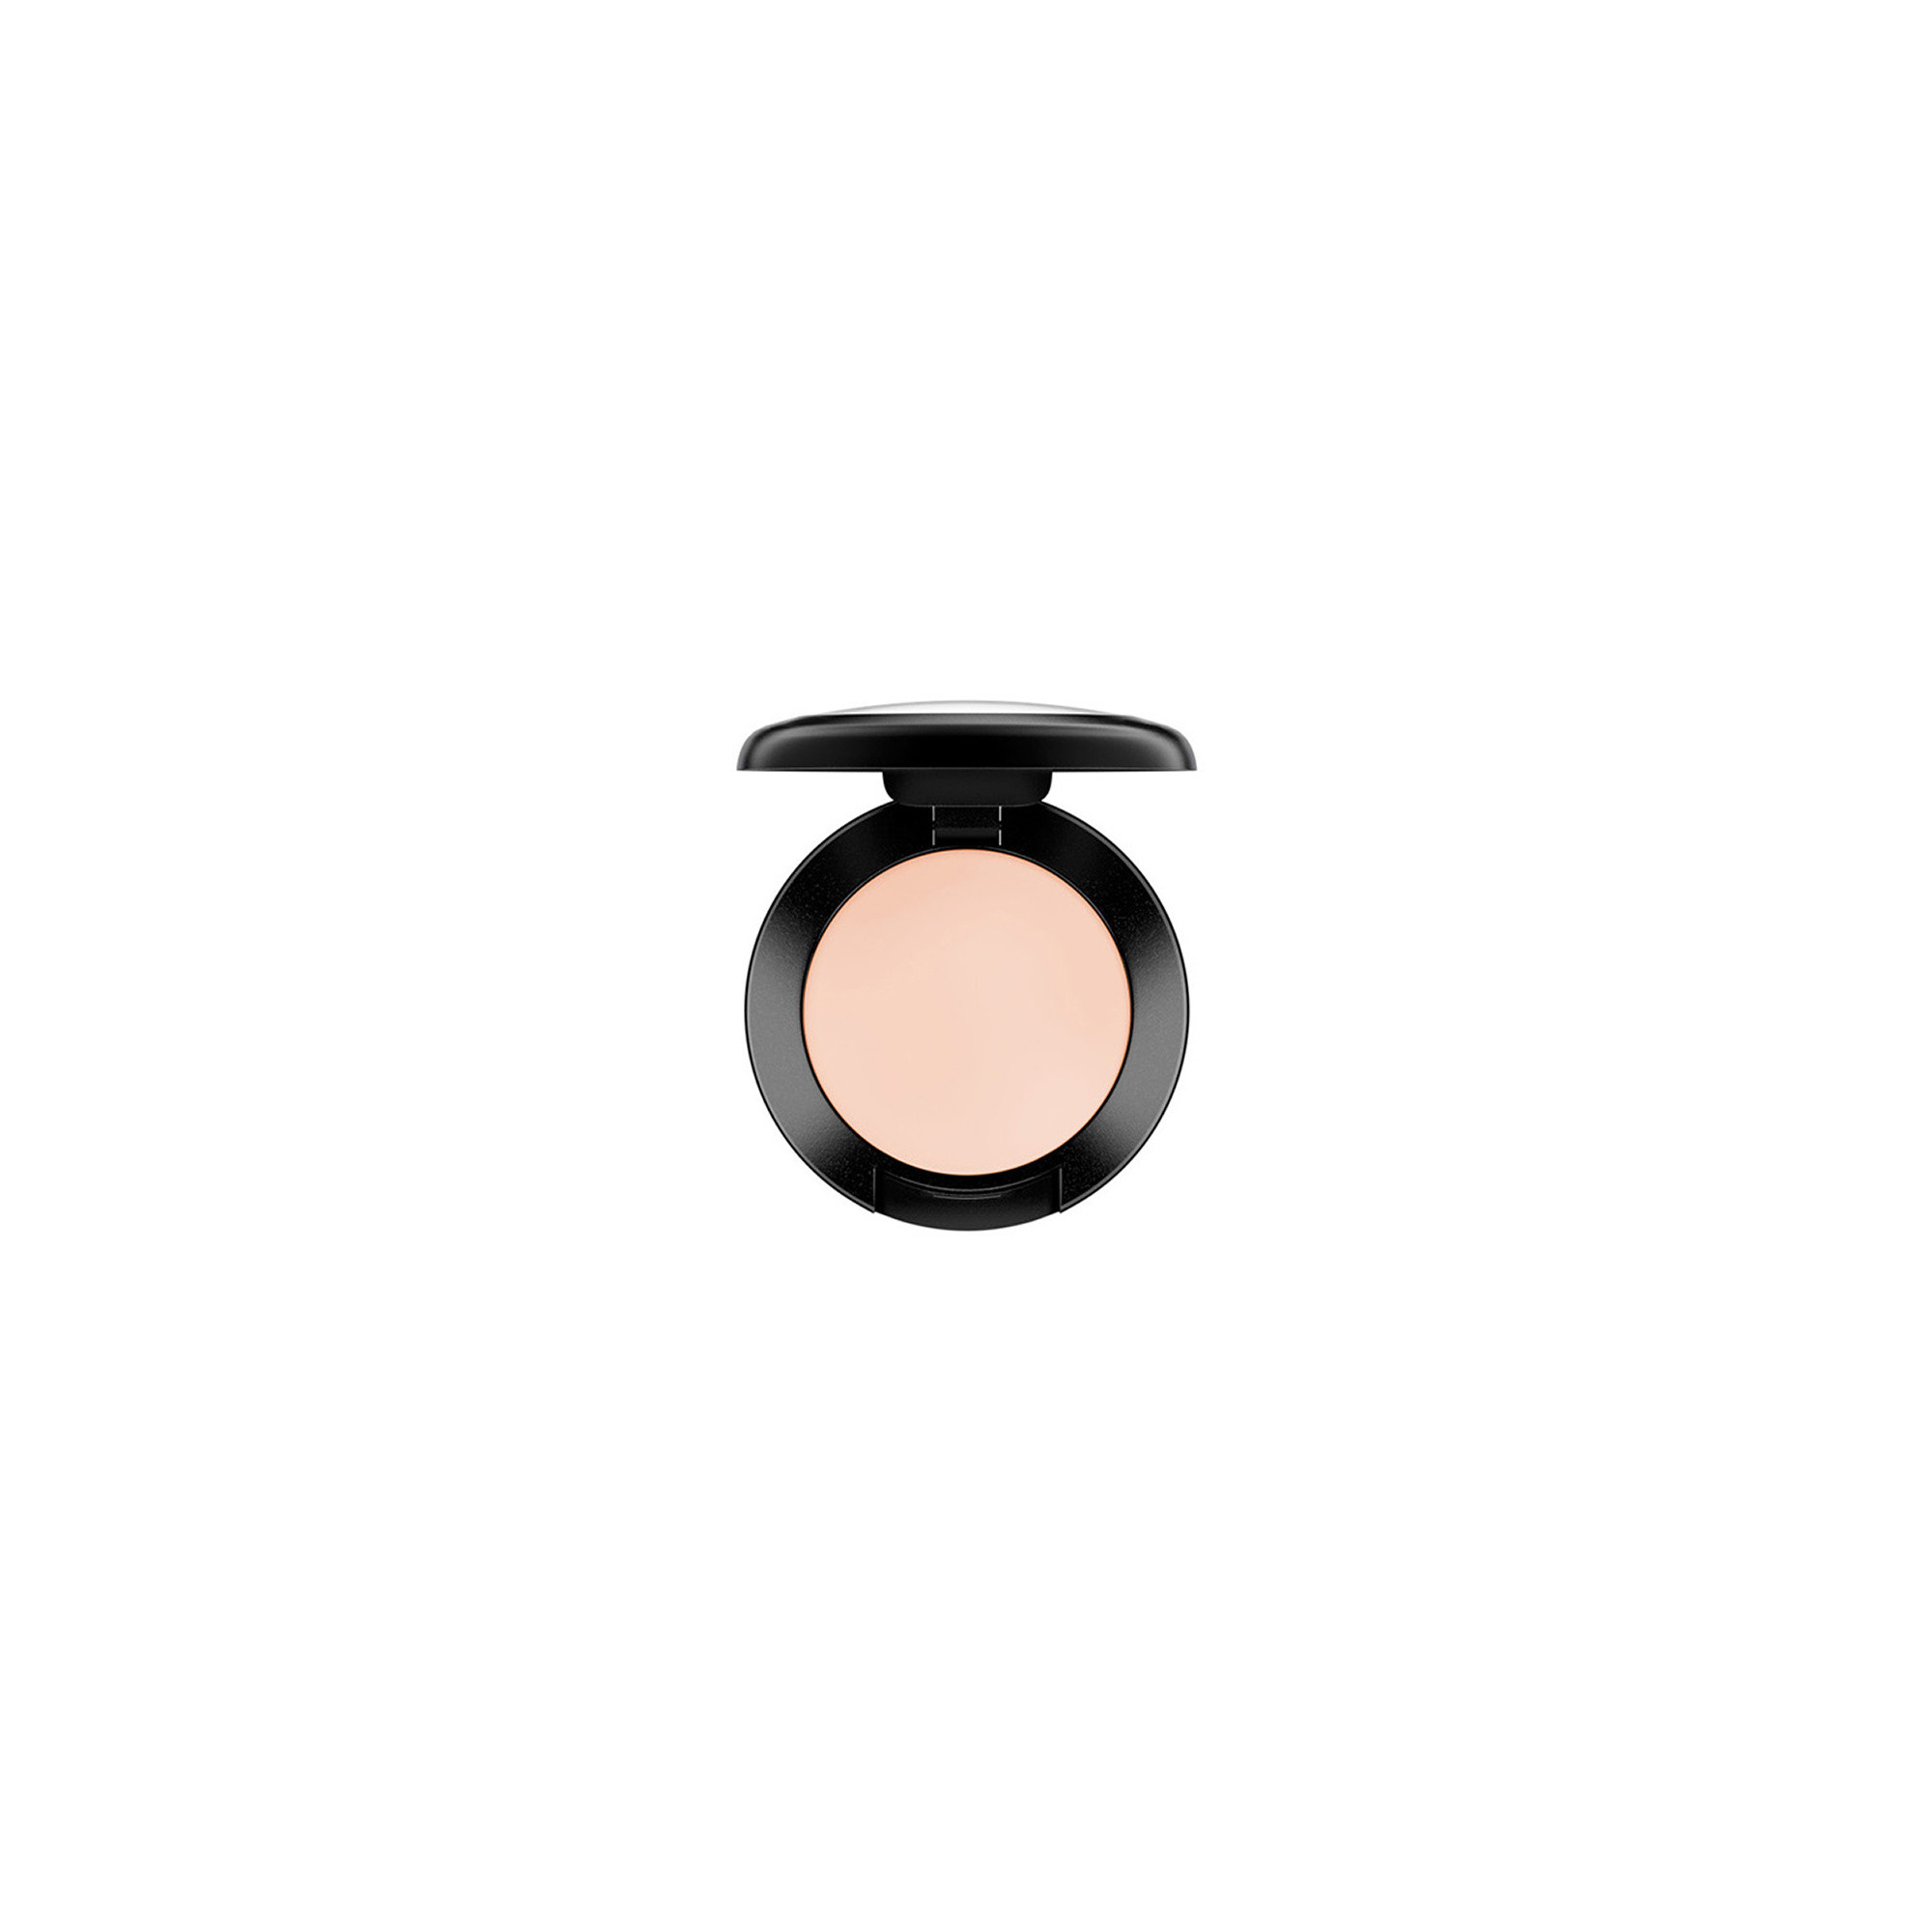 Studio Finish Concealer - NW20, NW20, large image number 0